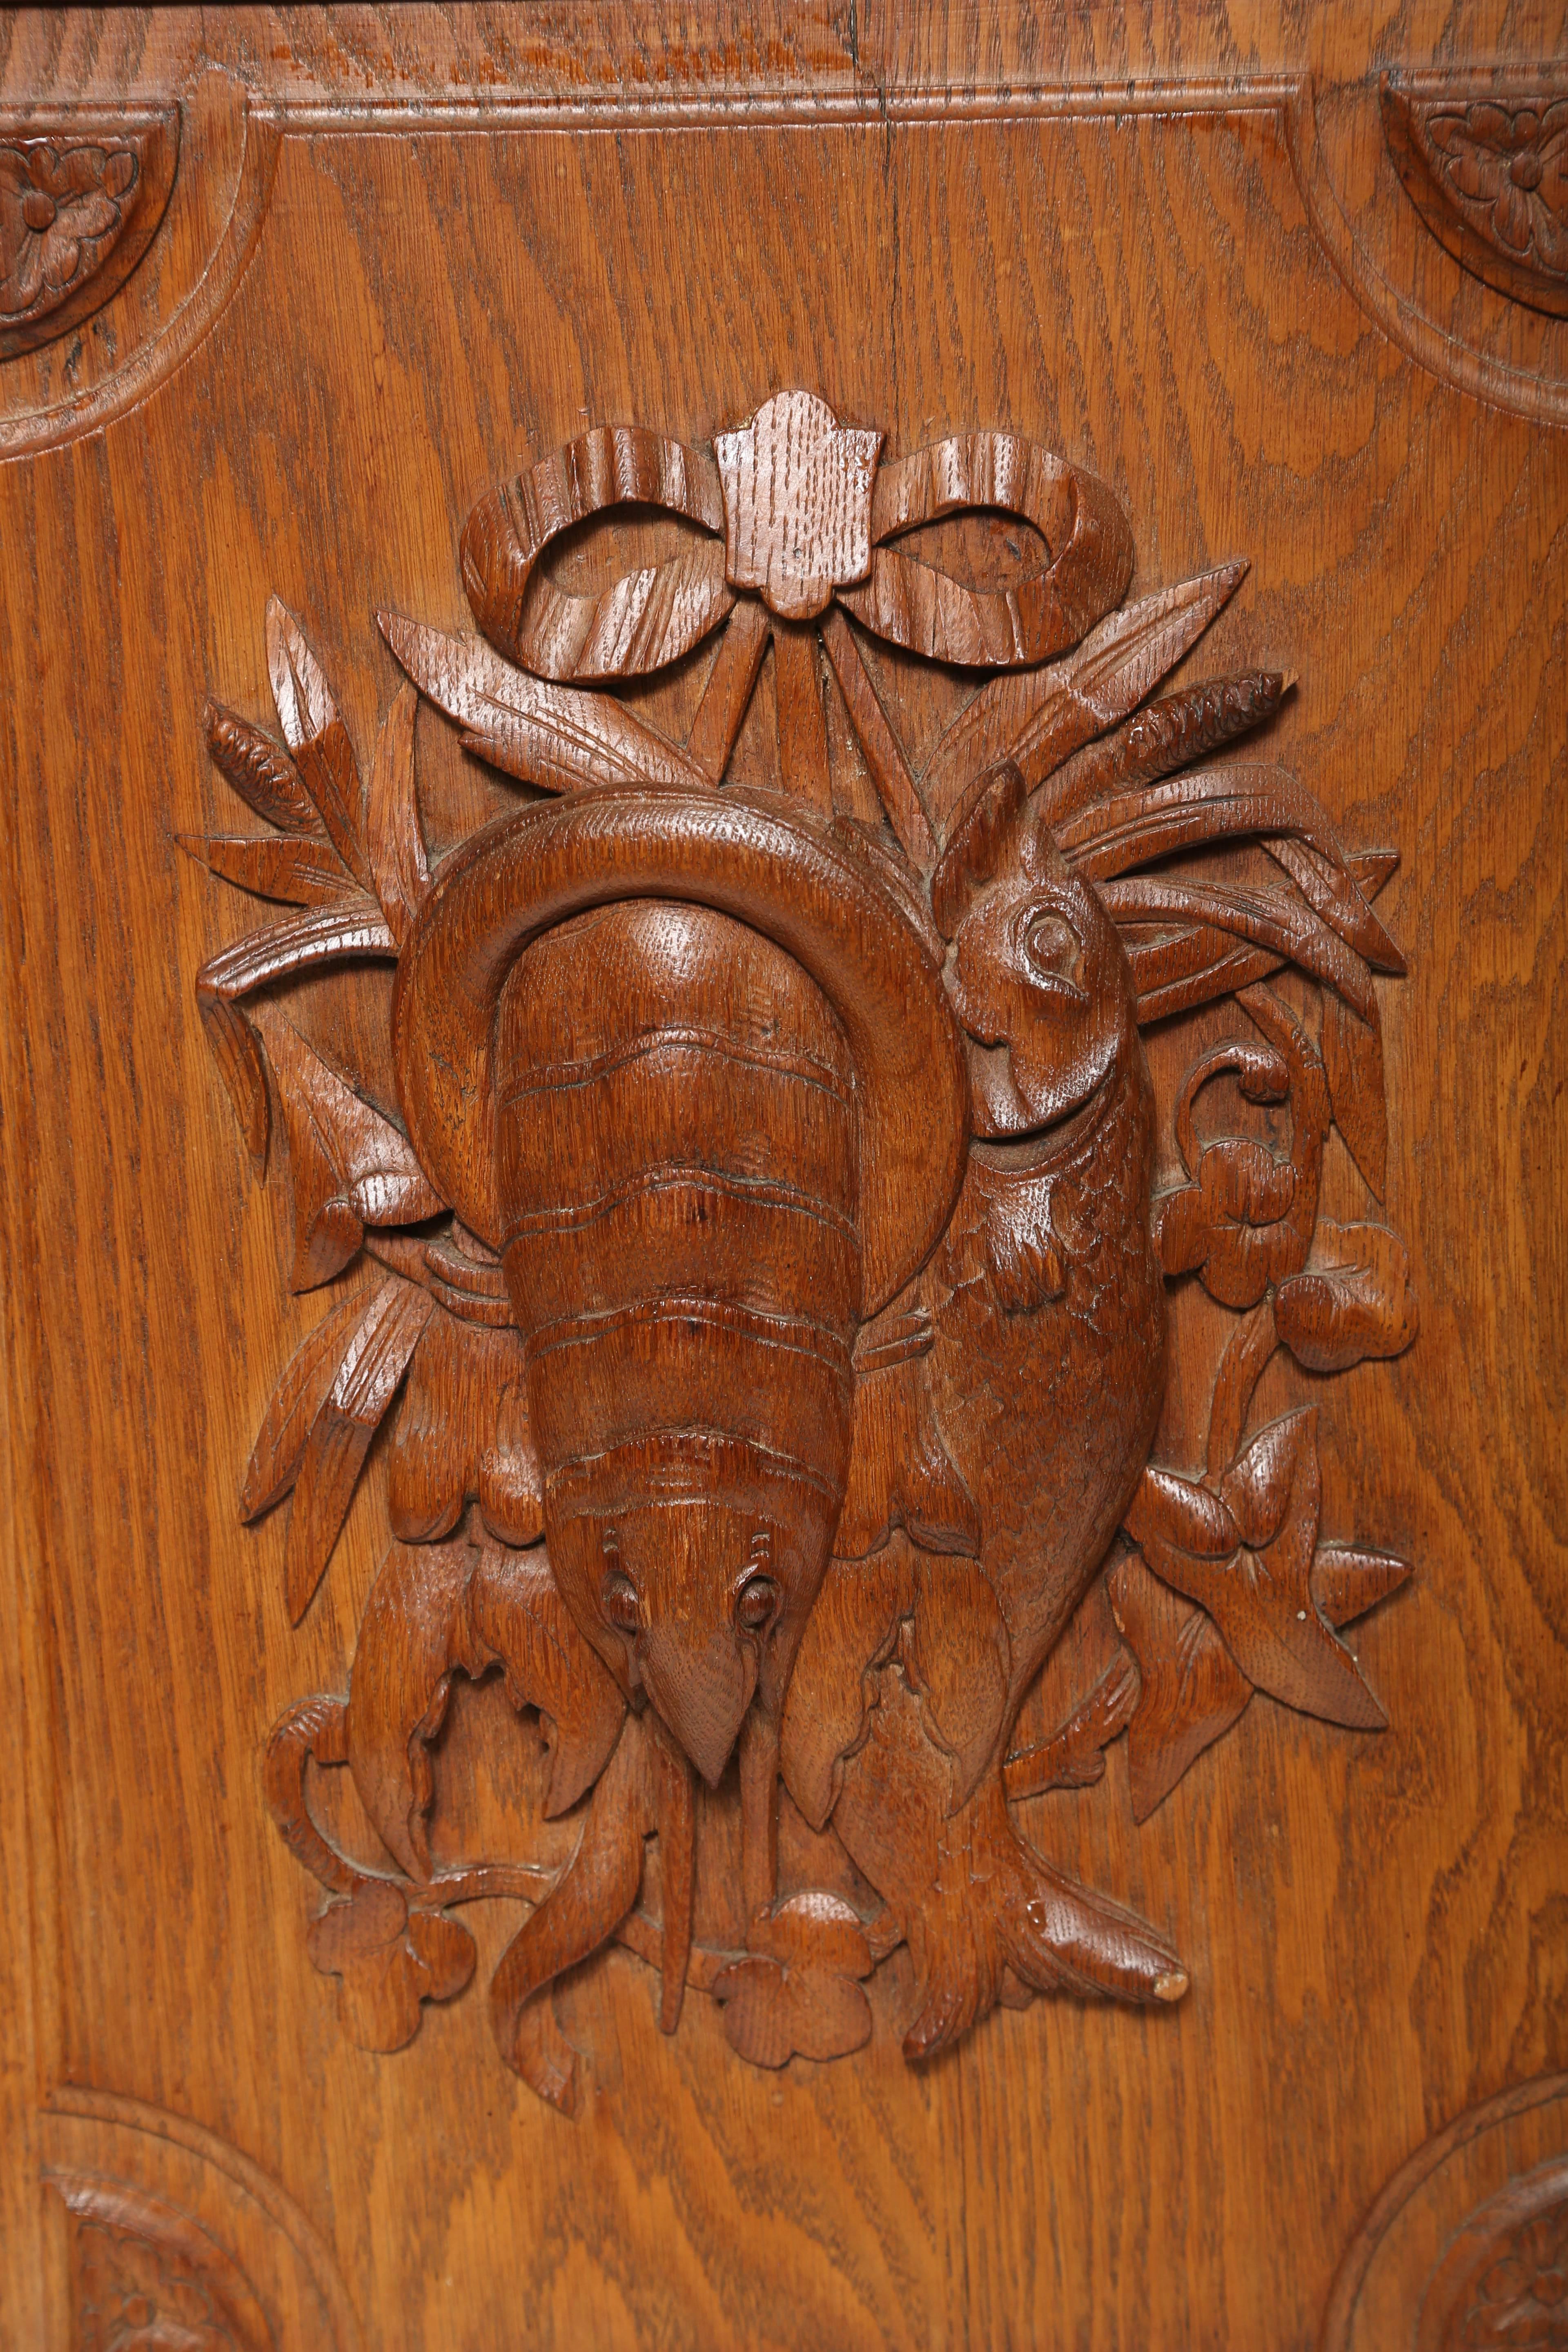 Deeply hand-carved wood fishing plaque referred to as a trophy panel.  It depicts  a lobster and a fish tied up with a bow on a fielded panel.